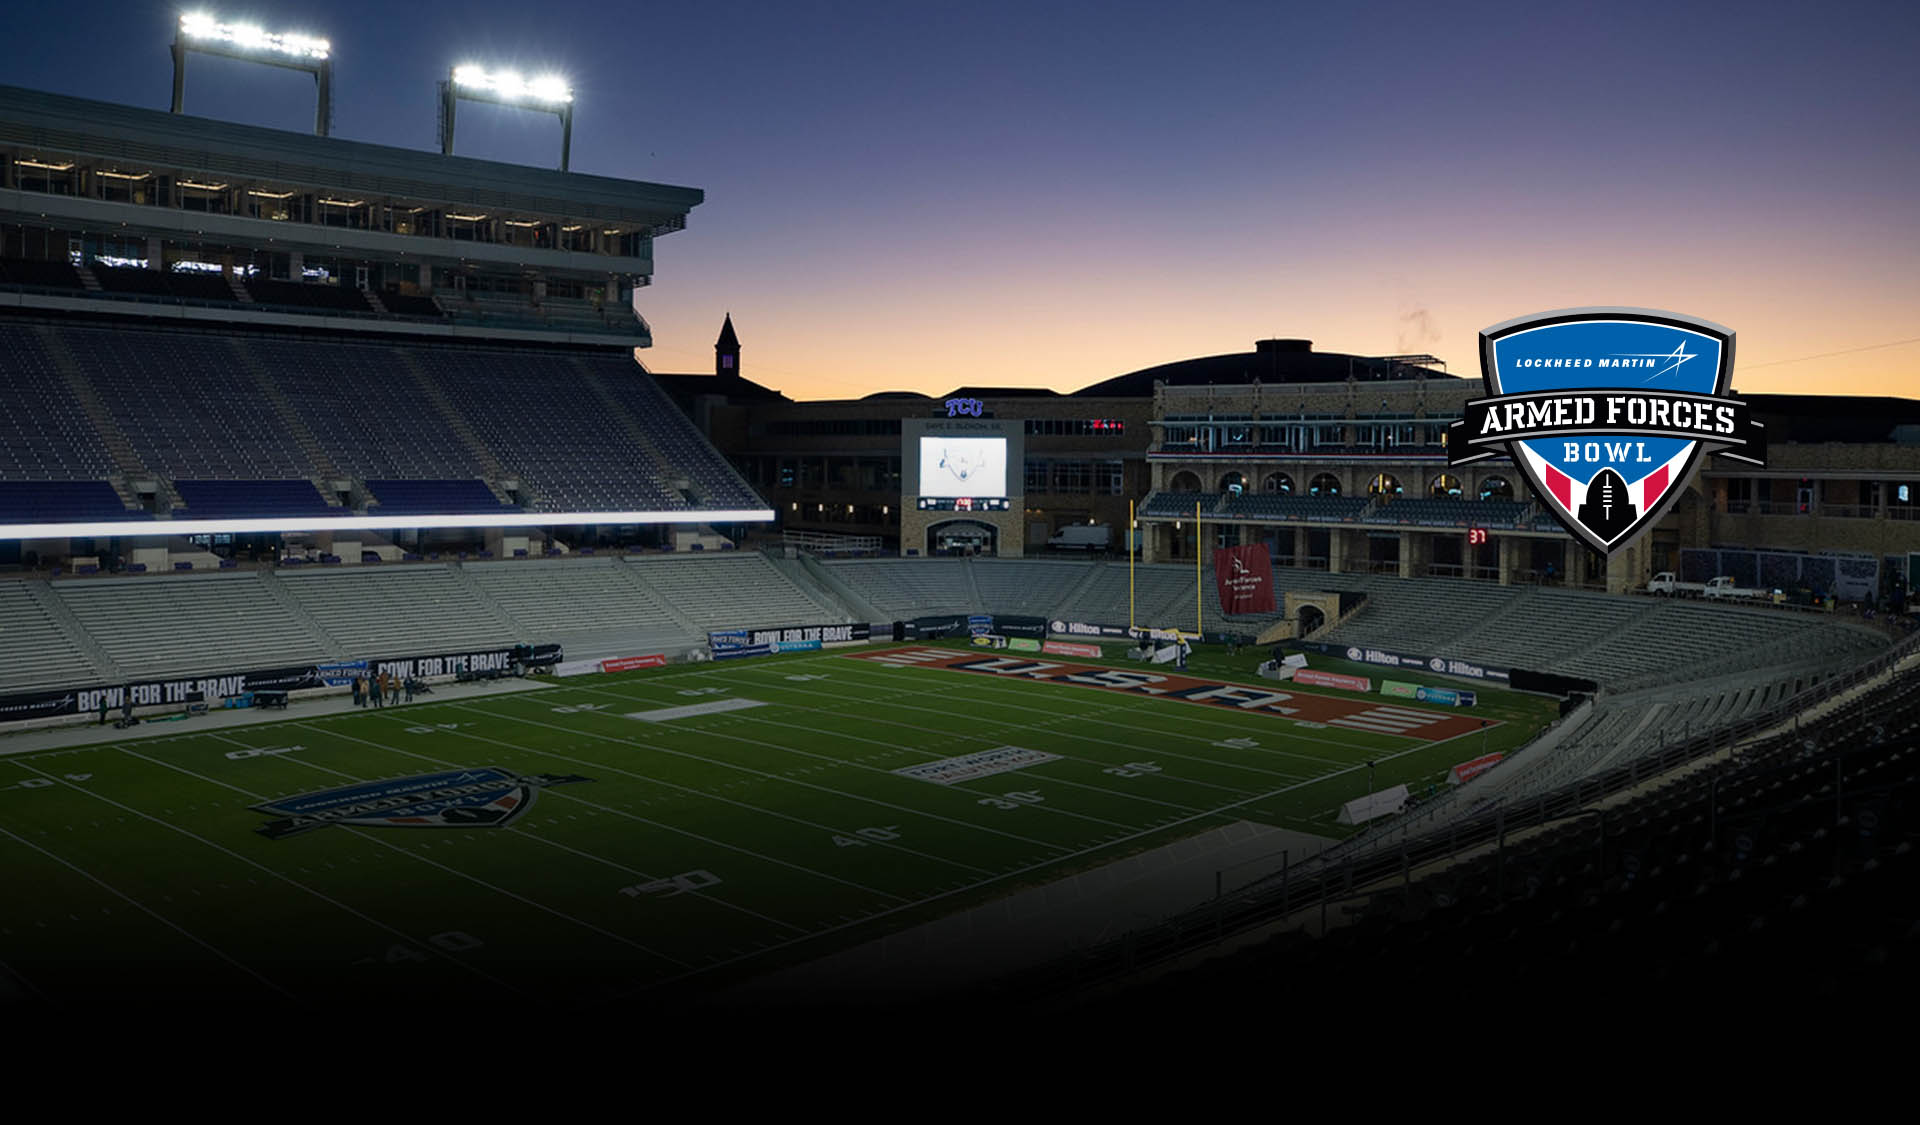 Armed Forces Bowl | Lockheed Martin